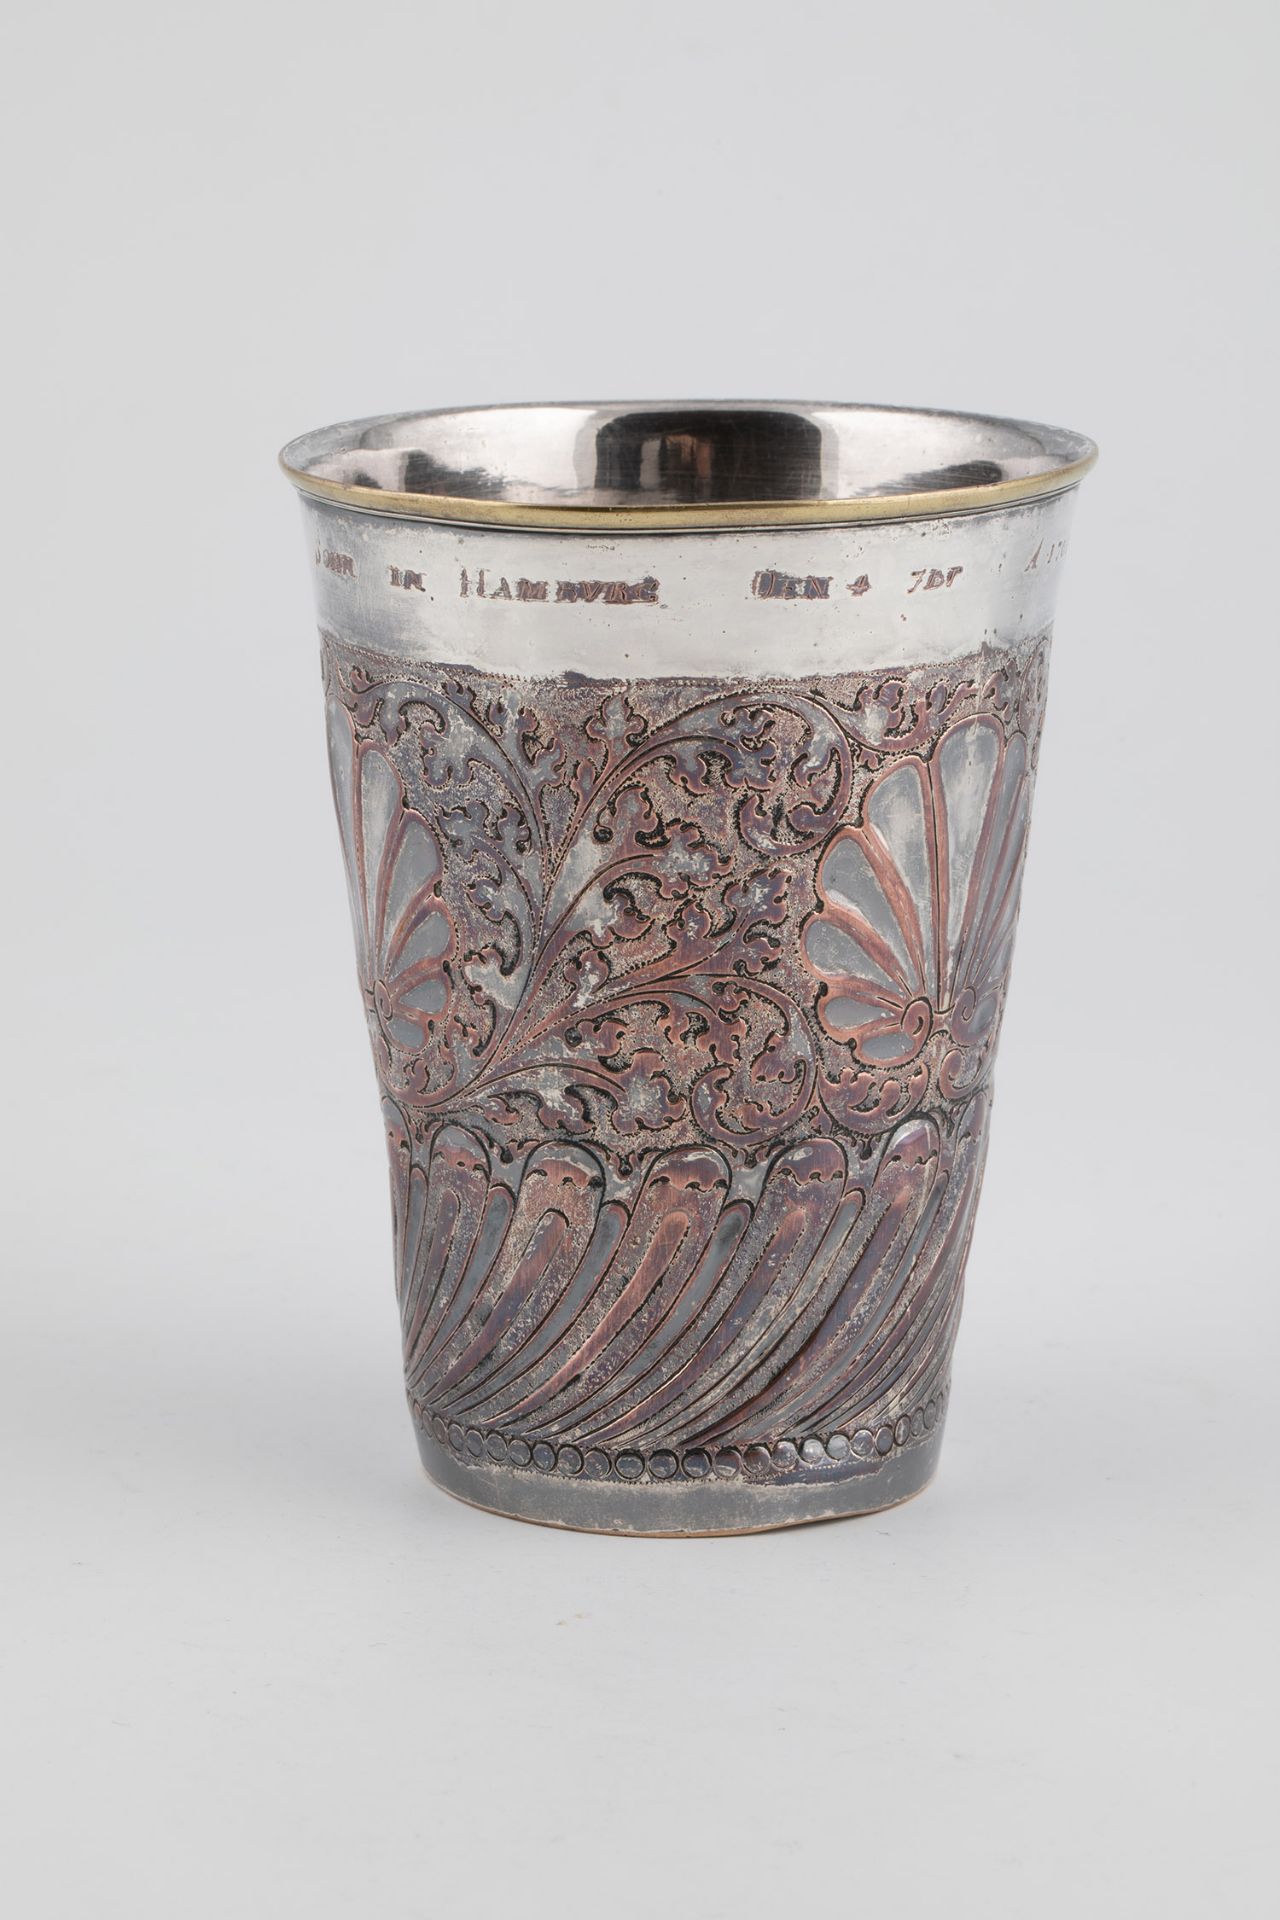 Large baroque cup - Image 2 of 3